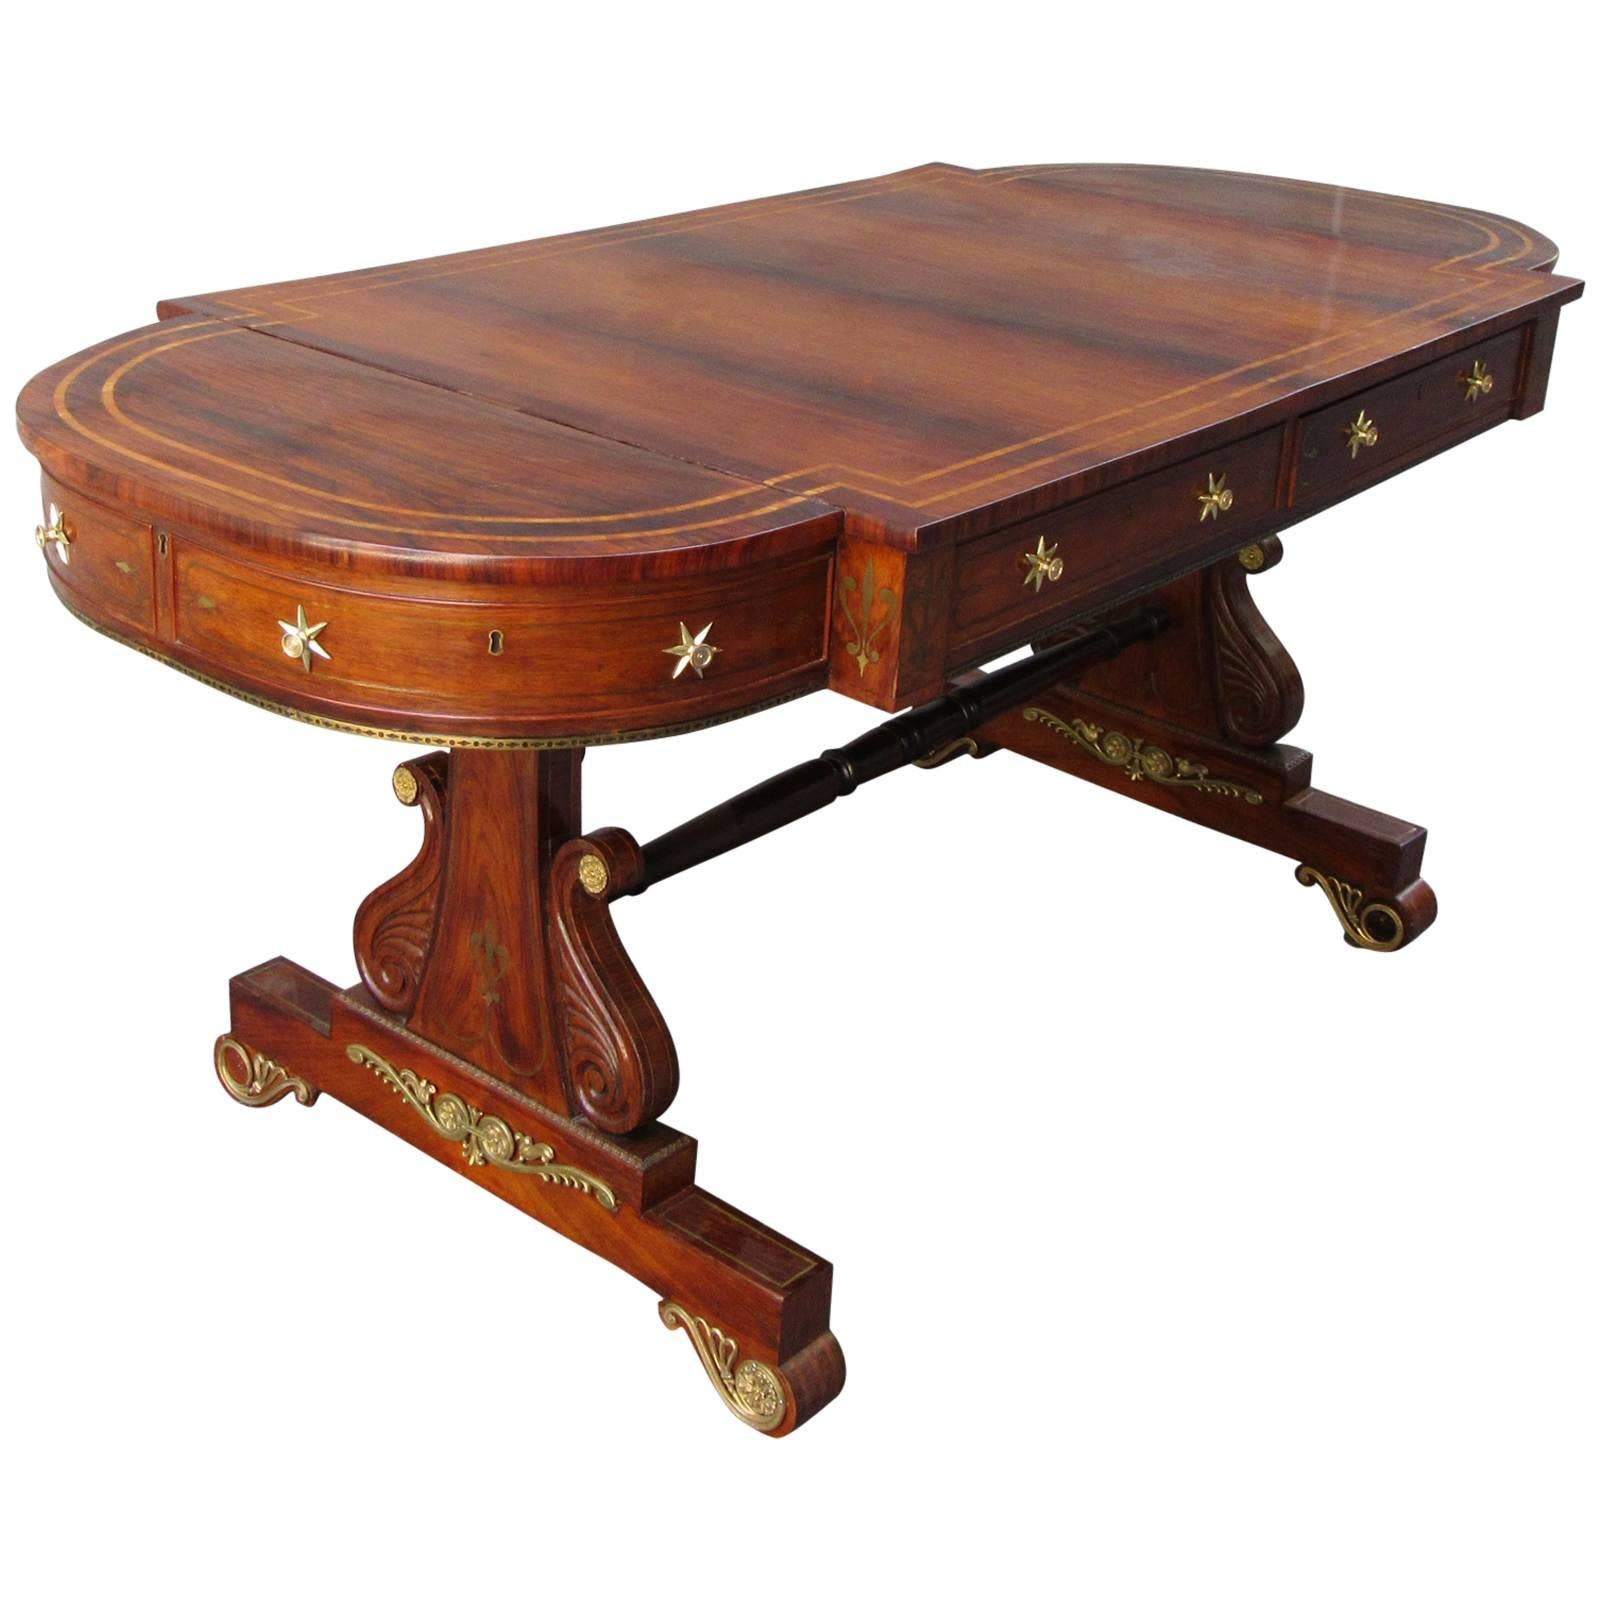 19th Century English Regency Rosewood Sofa Table Attributed to Gillows